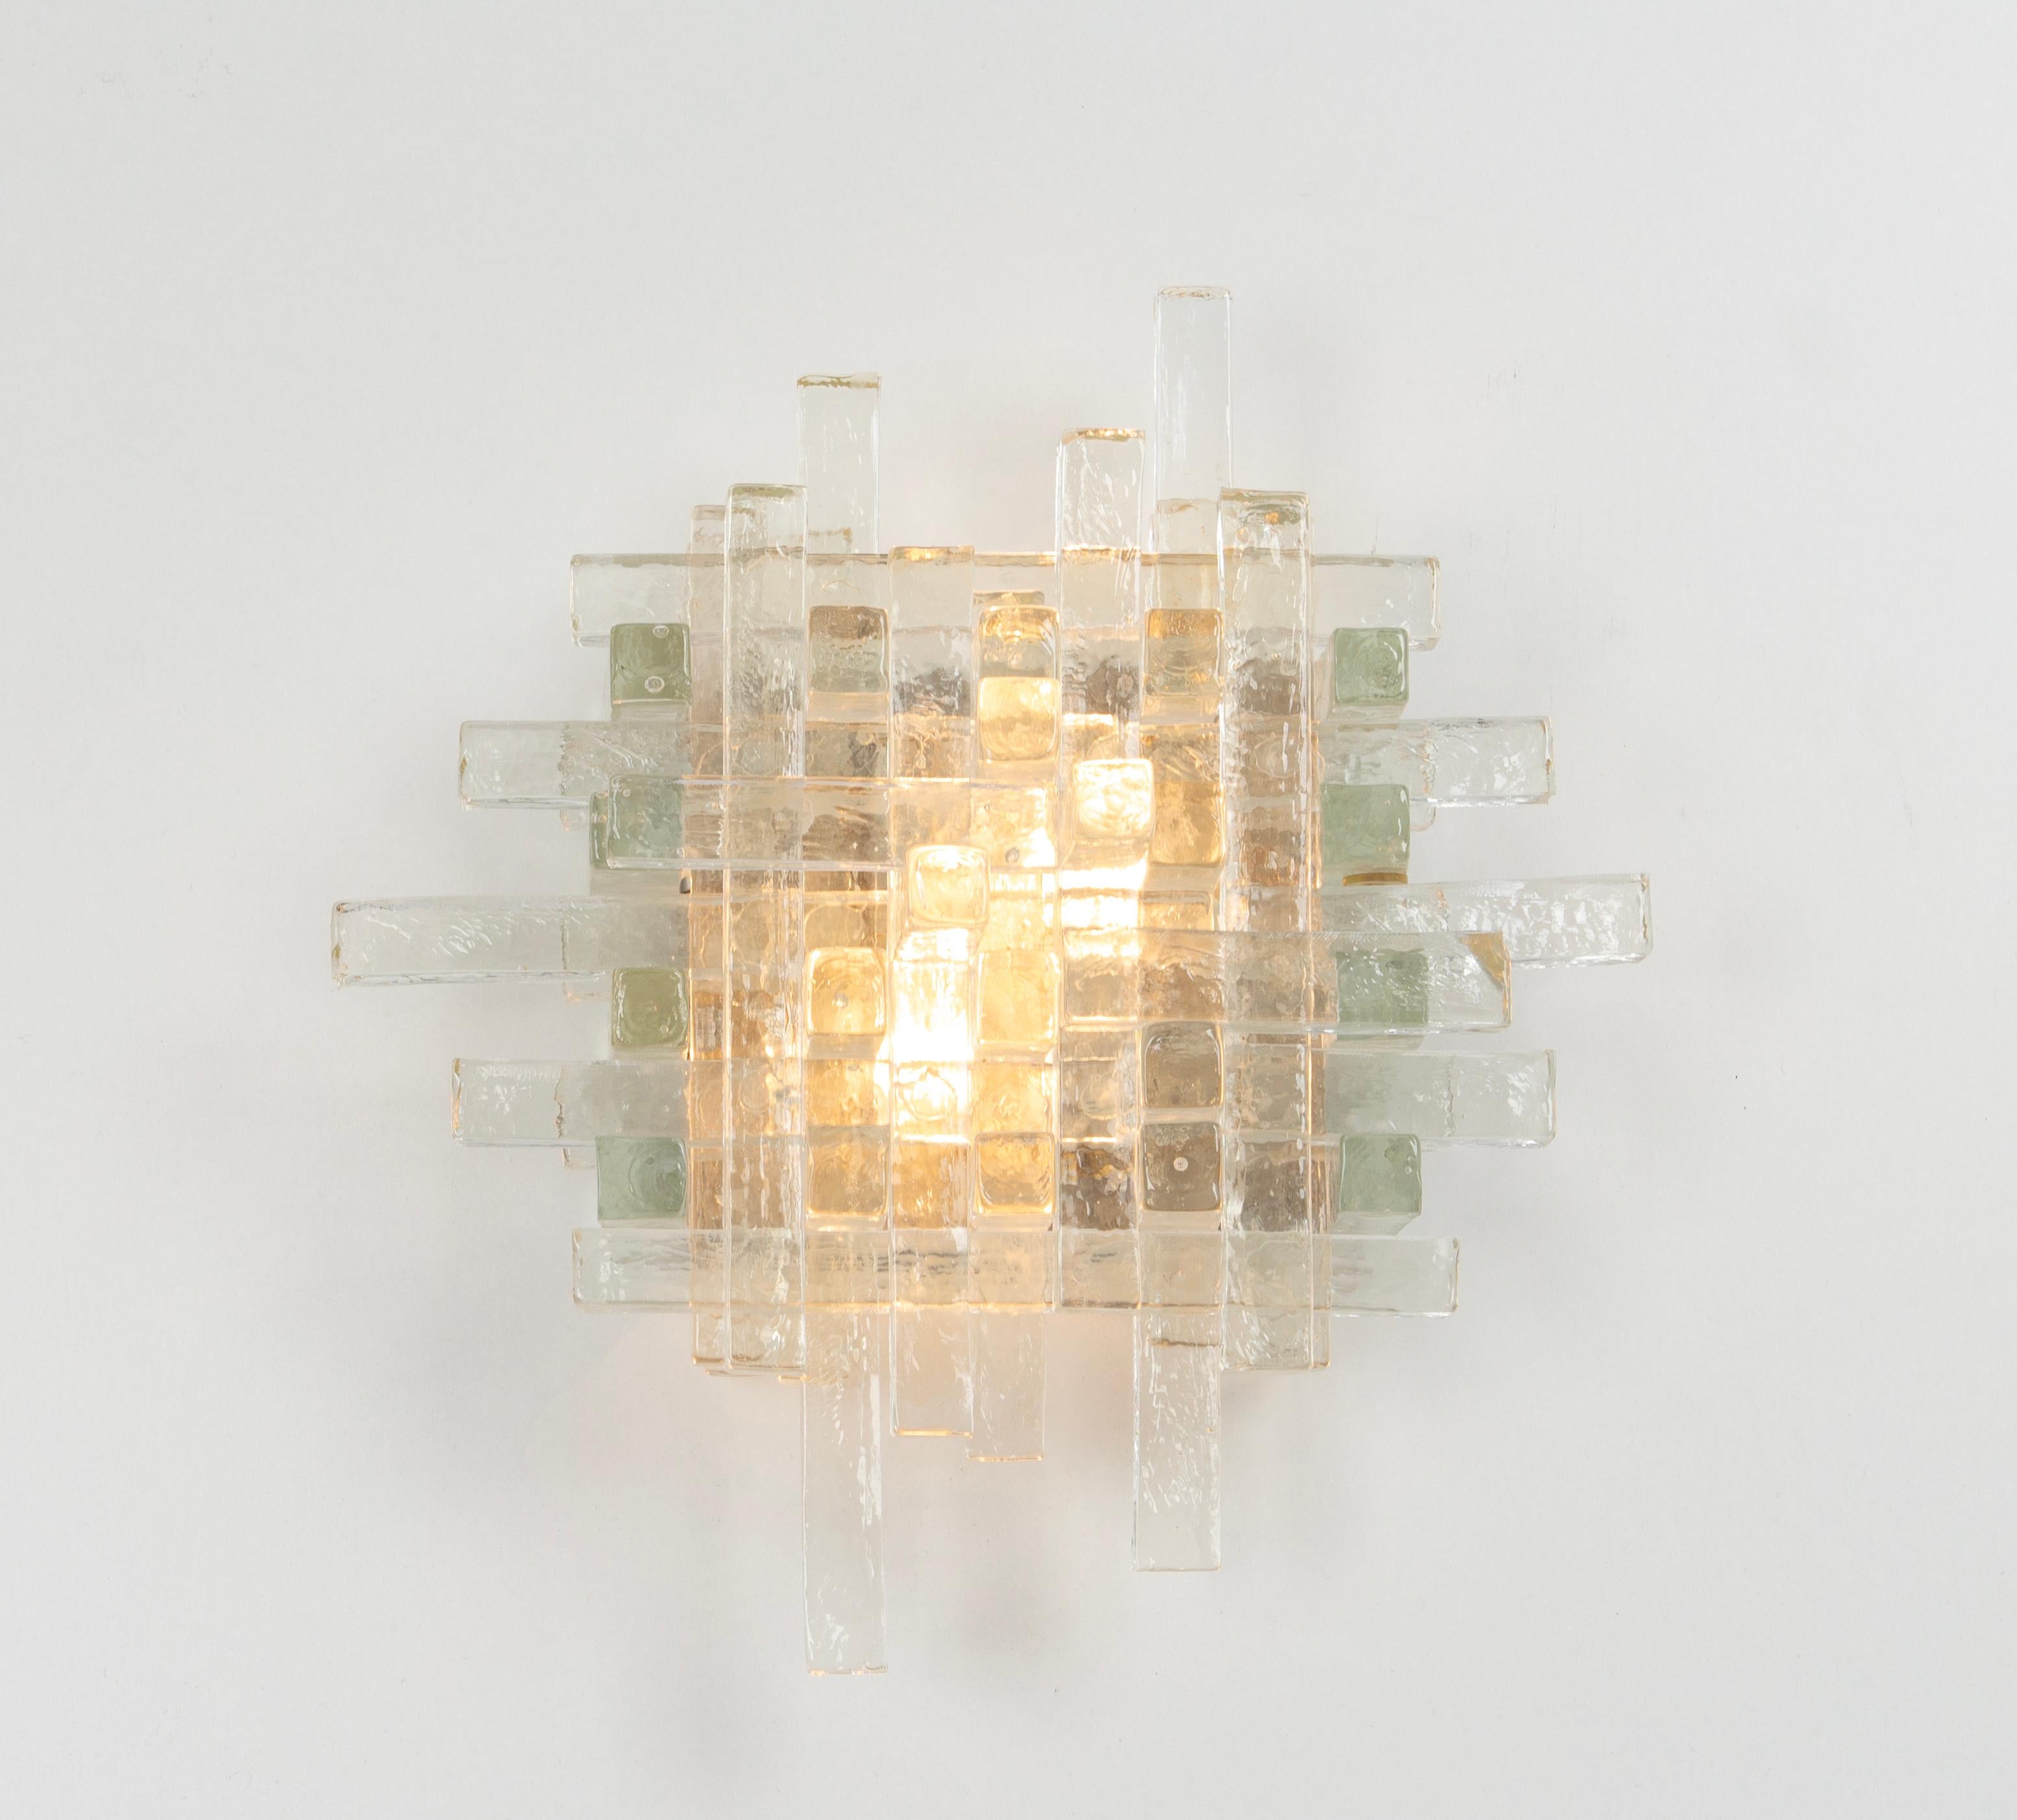 Brutalist mid-century wall sconce sconce by Albano Poli for Poliarte, 1970s
Poliarte Italy, sconce / wall applique, 1960s. 
It's composed of dozens of glass rectangles of different sizes stacked together. The glass is clear but textured. Holds two